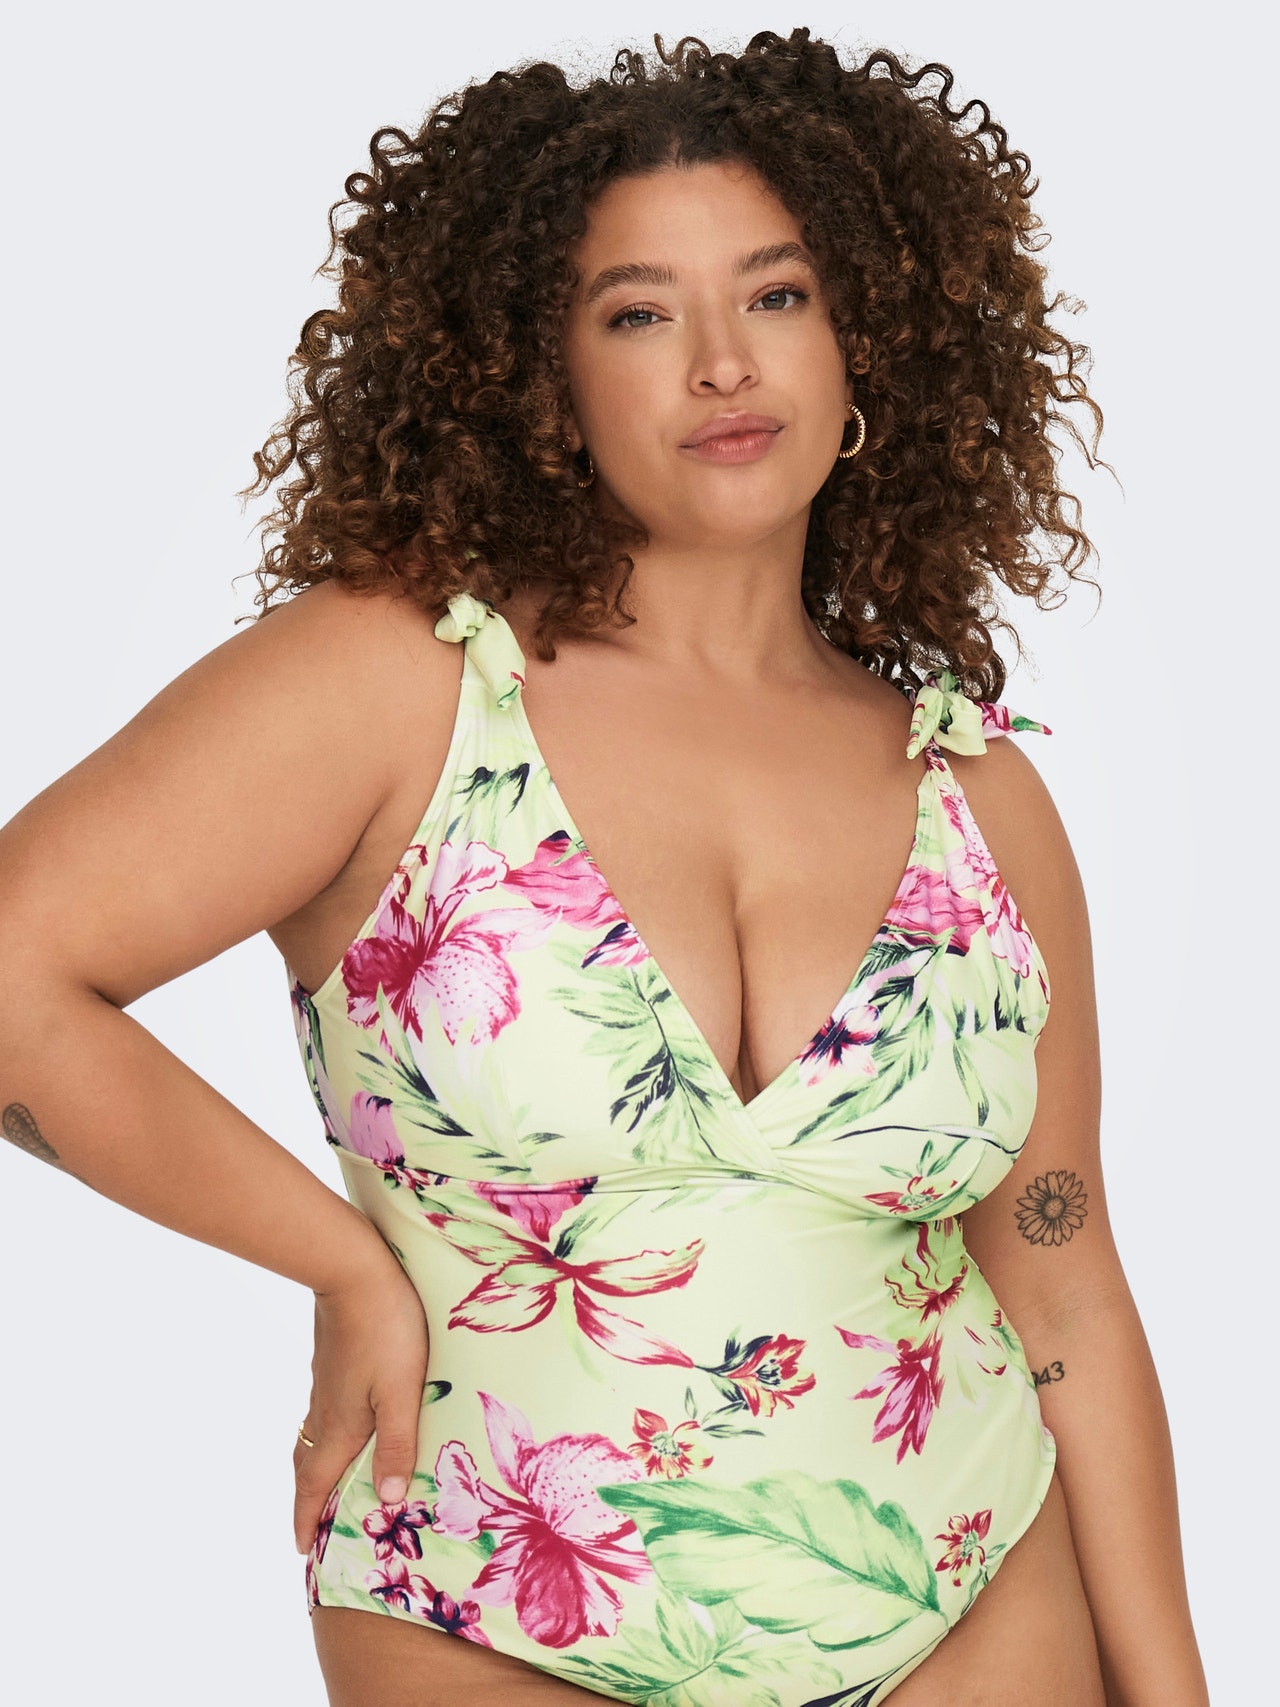 ONLY Racerback provides postural support Swimwear -Pastel Green - 15267921